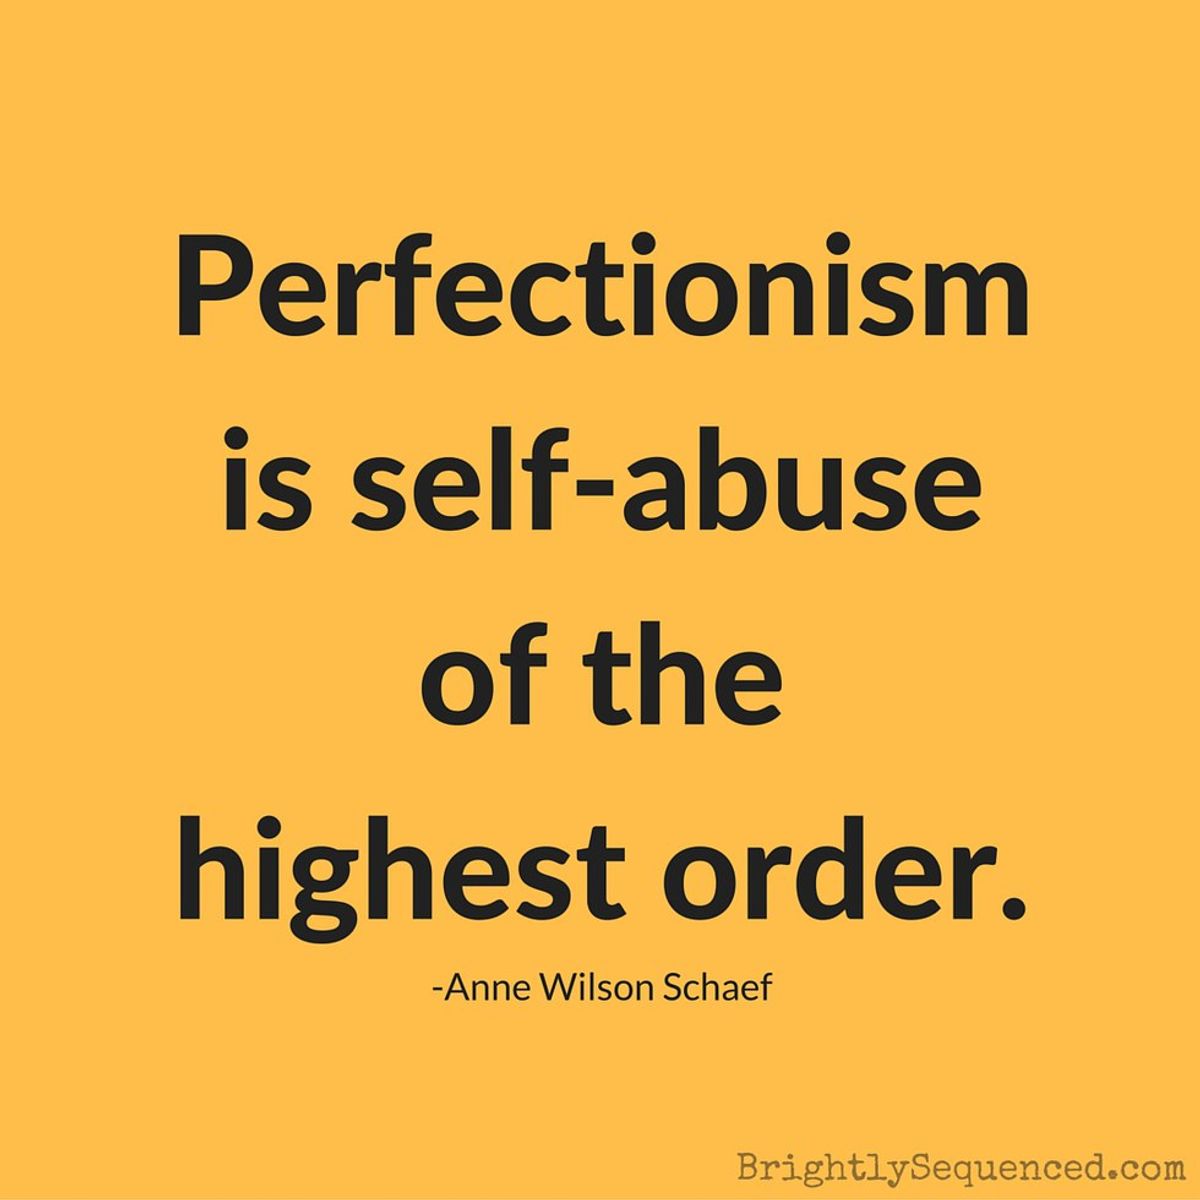 My Epiphany On The Danger Of Perfectionism